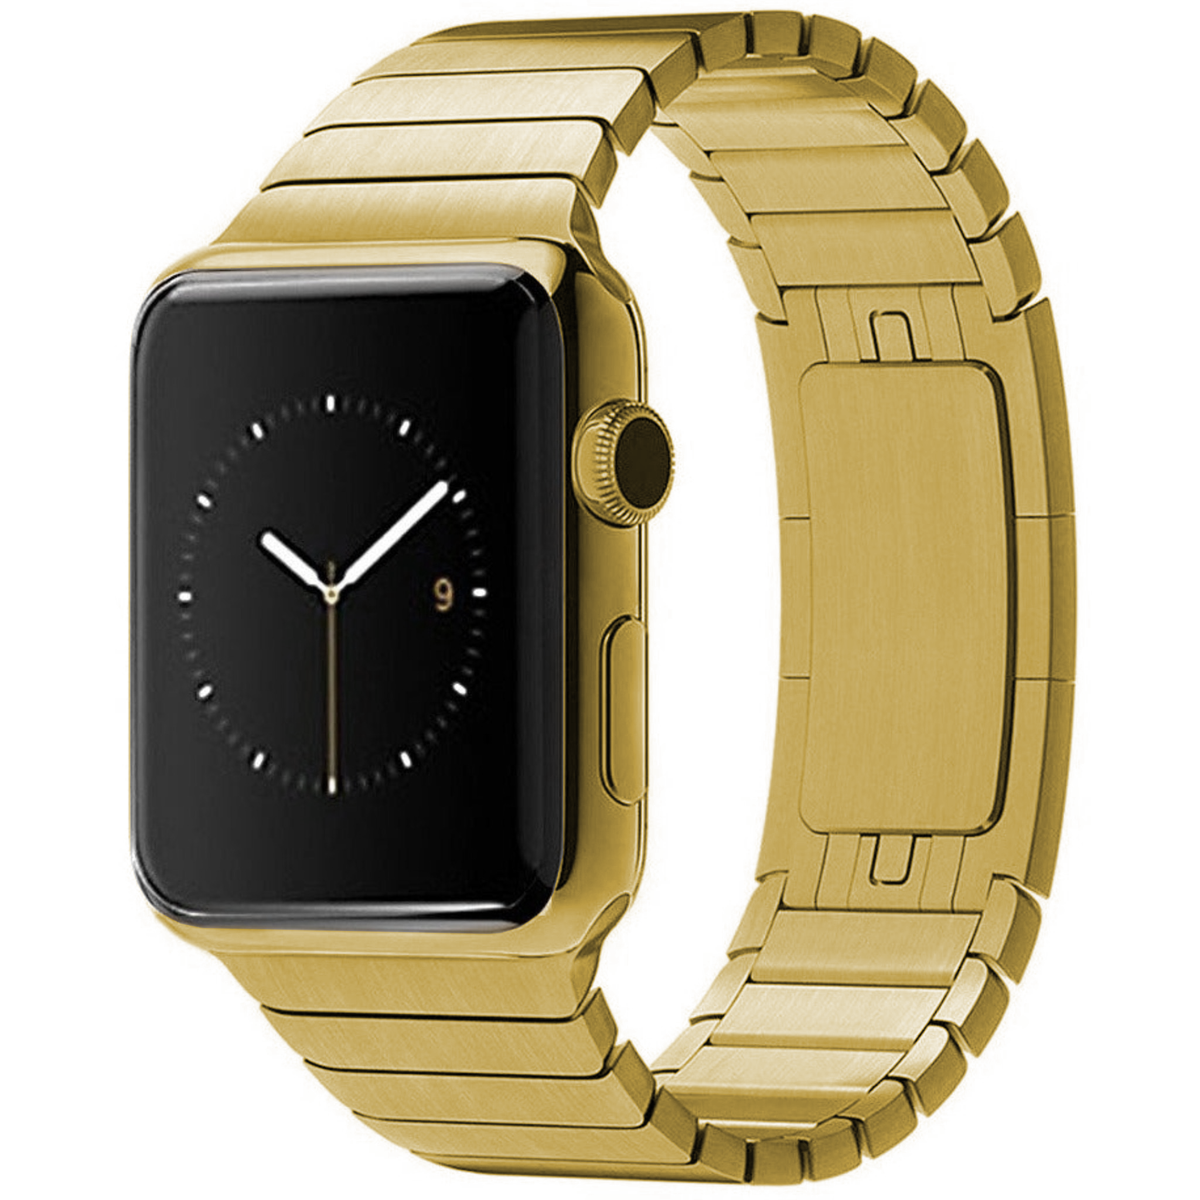 Gold Ceramic Stainless Steel Apple Watch Band